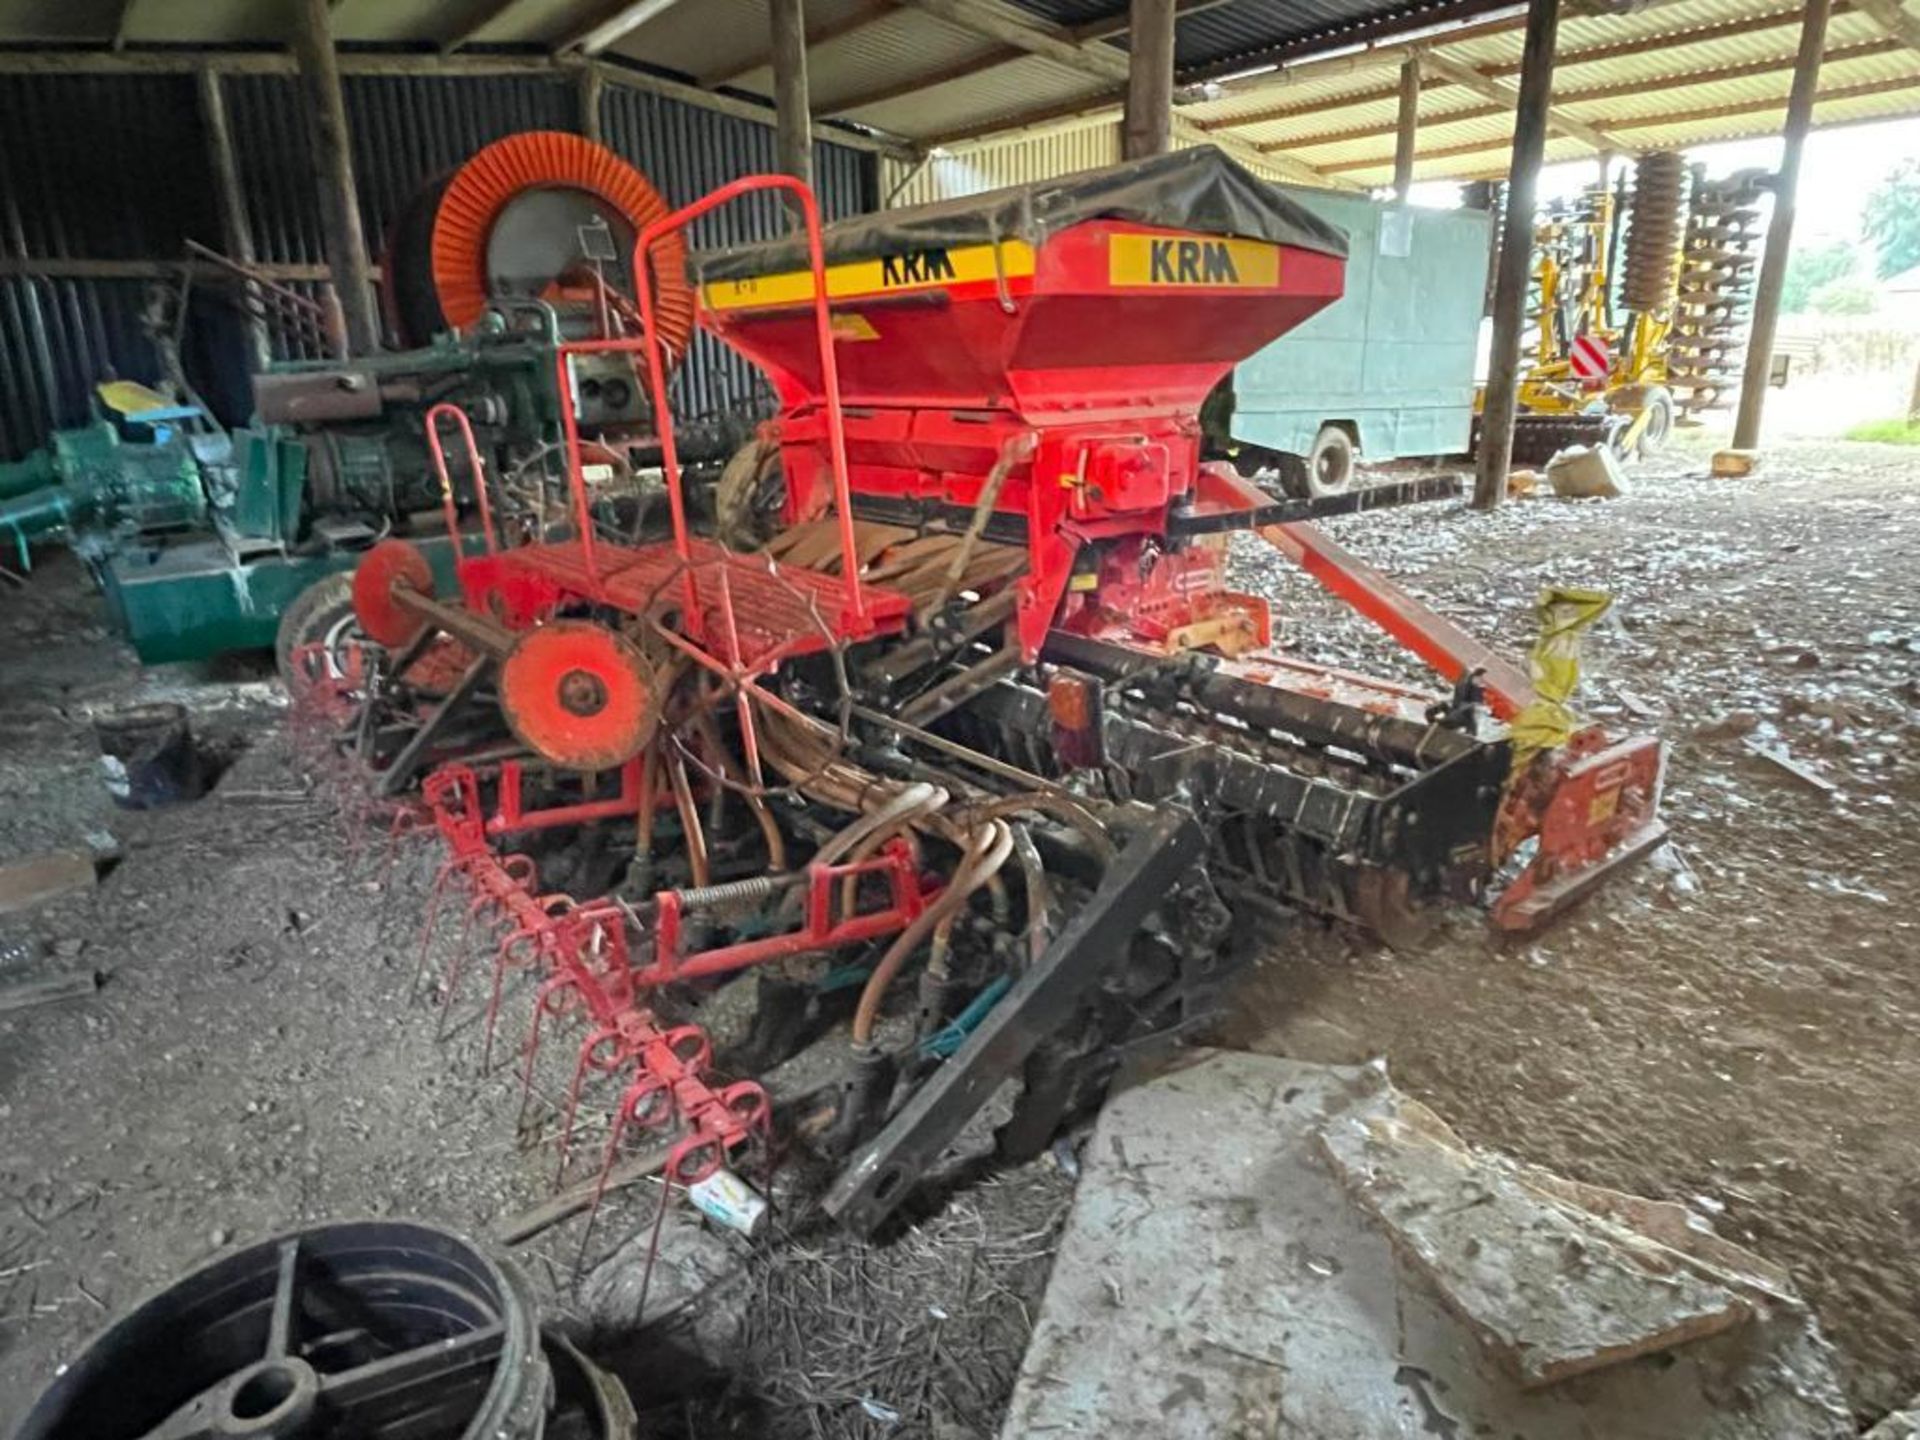 2003 Maschio Reco Tiller DM4000 4m power harrow with rear packer roll and 2000 KRM RTi 2 4m combinat - Image 10 of 13